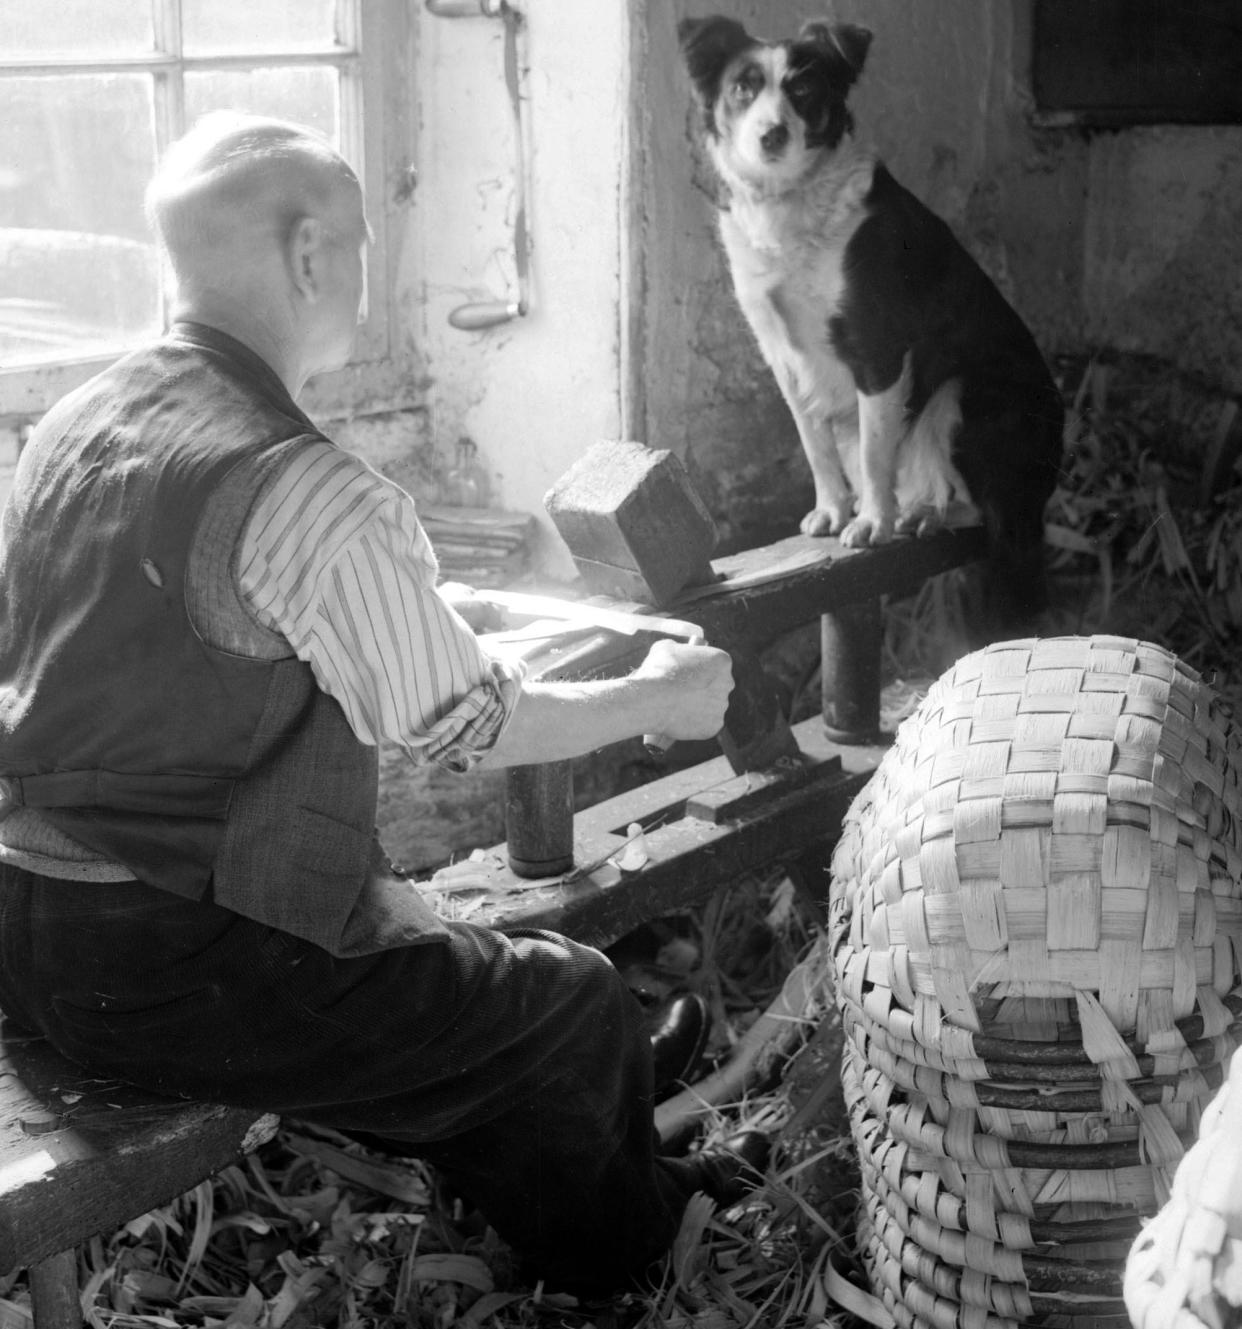 https://www.gettyimages.co.uk/detail/news-photo/basket-making-in-the-lake-district-a-collie-dog-sits-on-his-news-photo/1450420143?adppopup=true